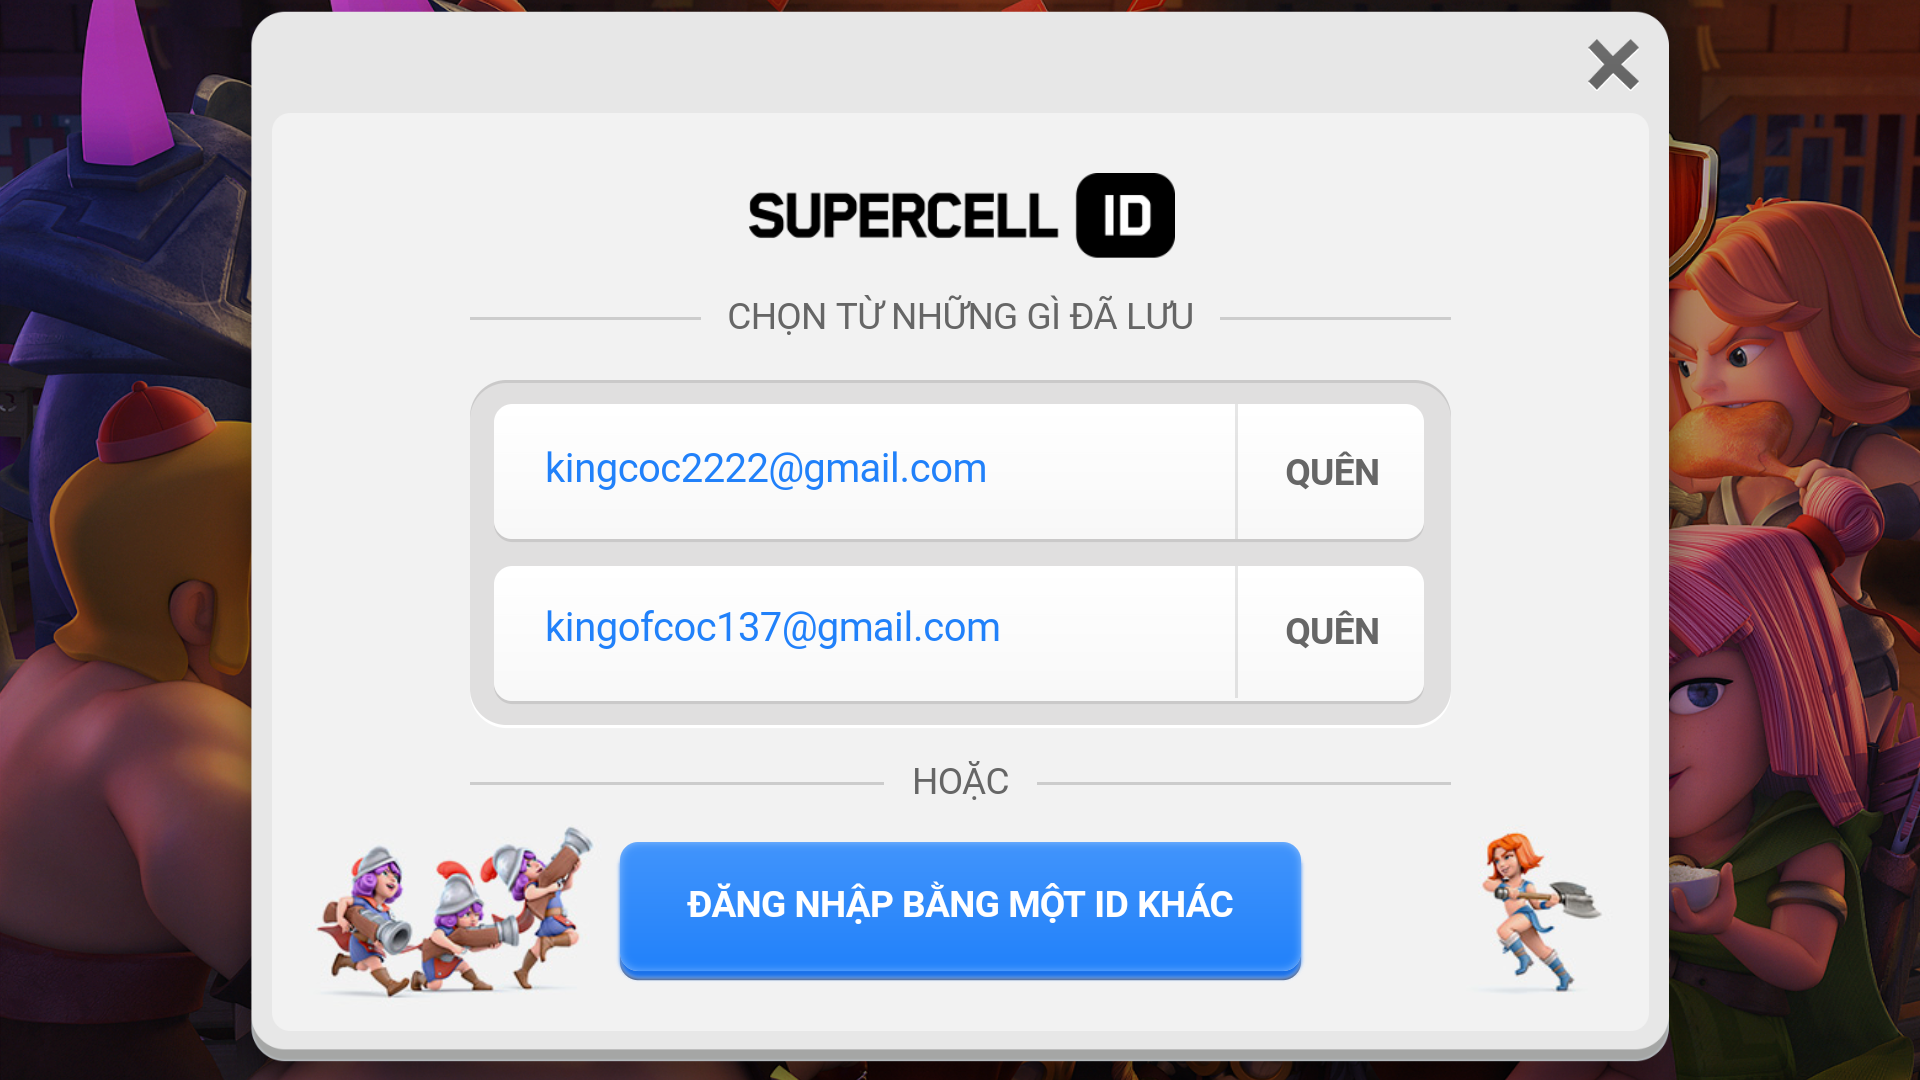 Gmail supercell. Supercell ID код. Суперселл аккаунты. Номер Supercell. Игры Supercell ID.